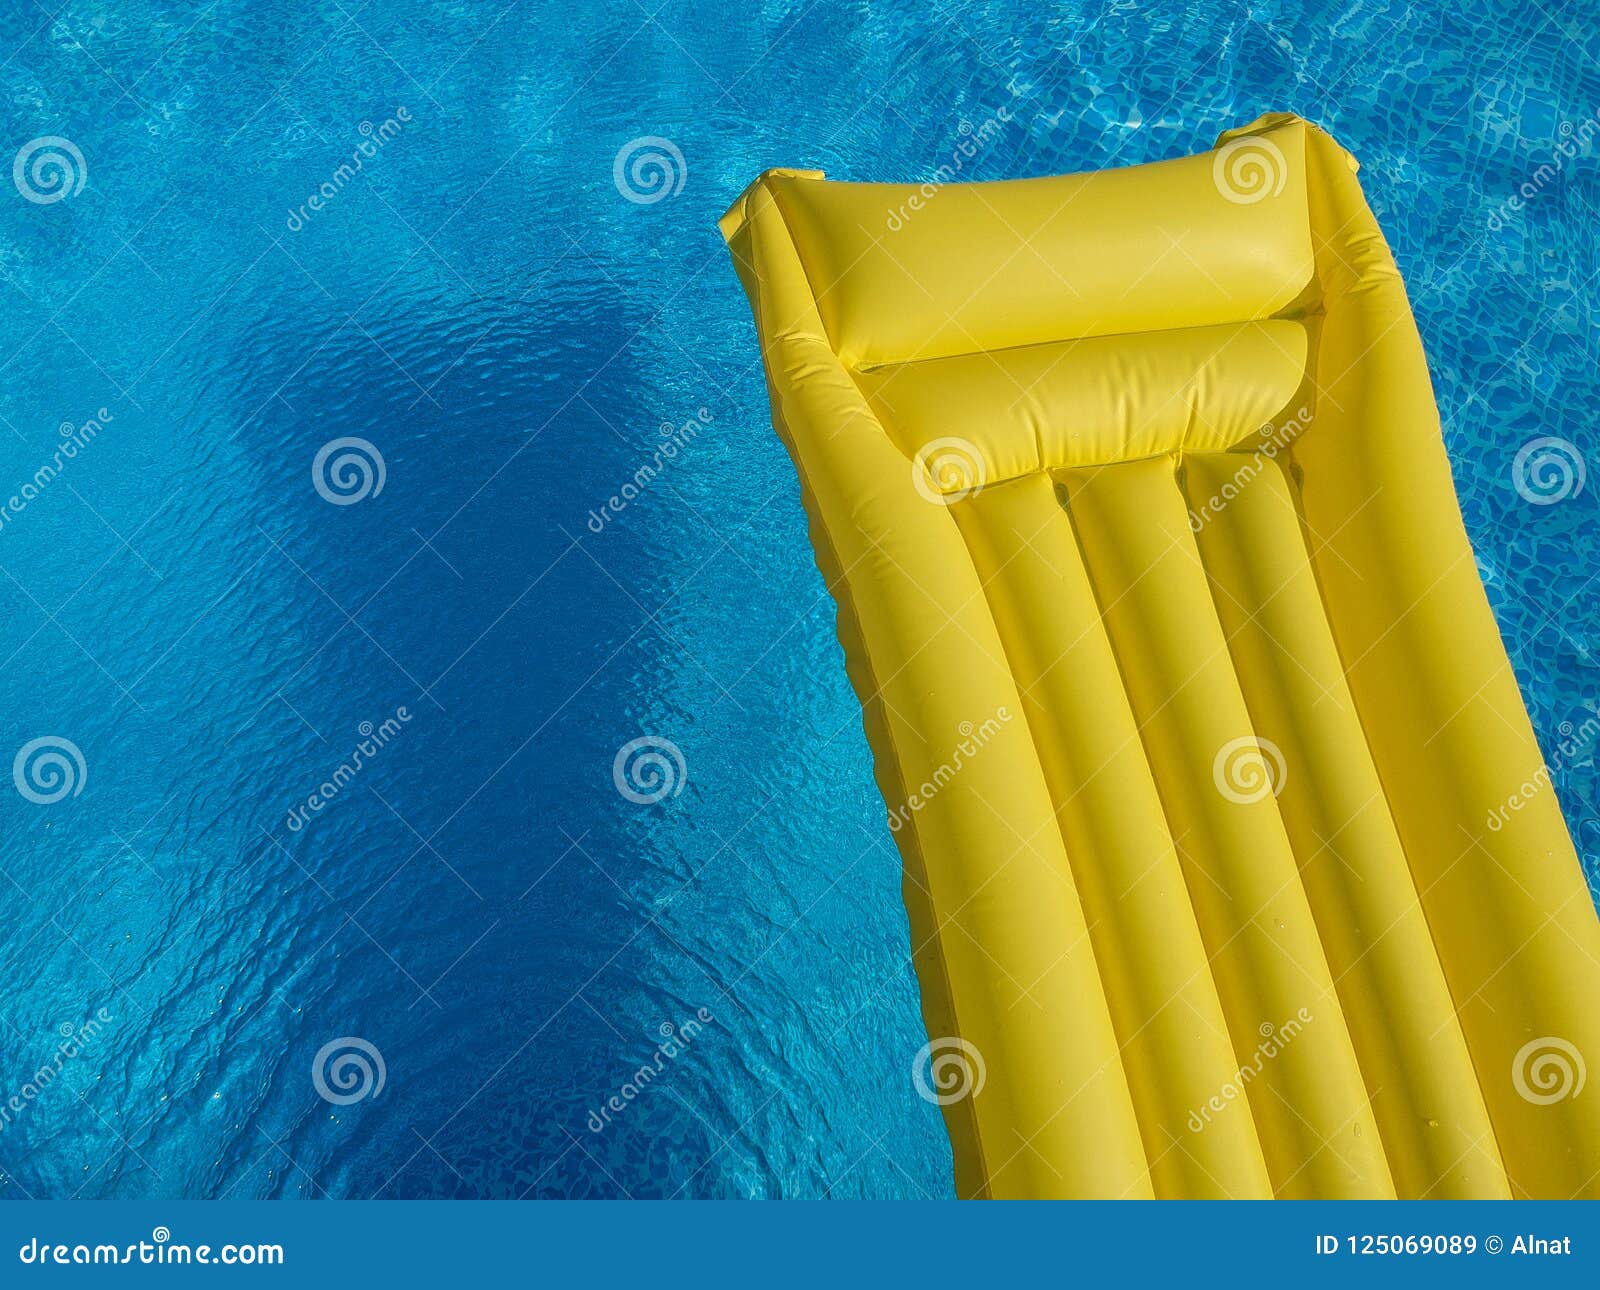 Top View of an Inflatable Mattress in a Backyard Swimming Pool Stock ...